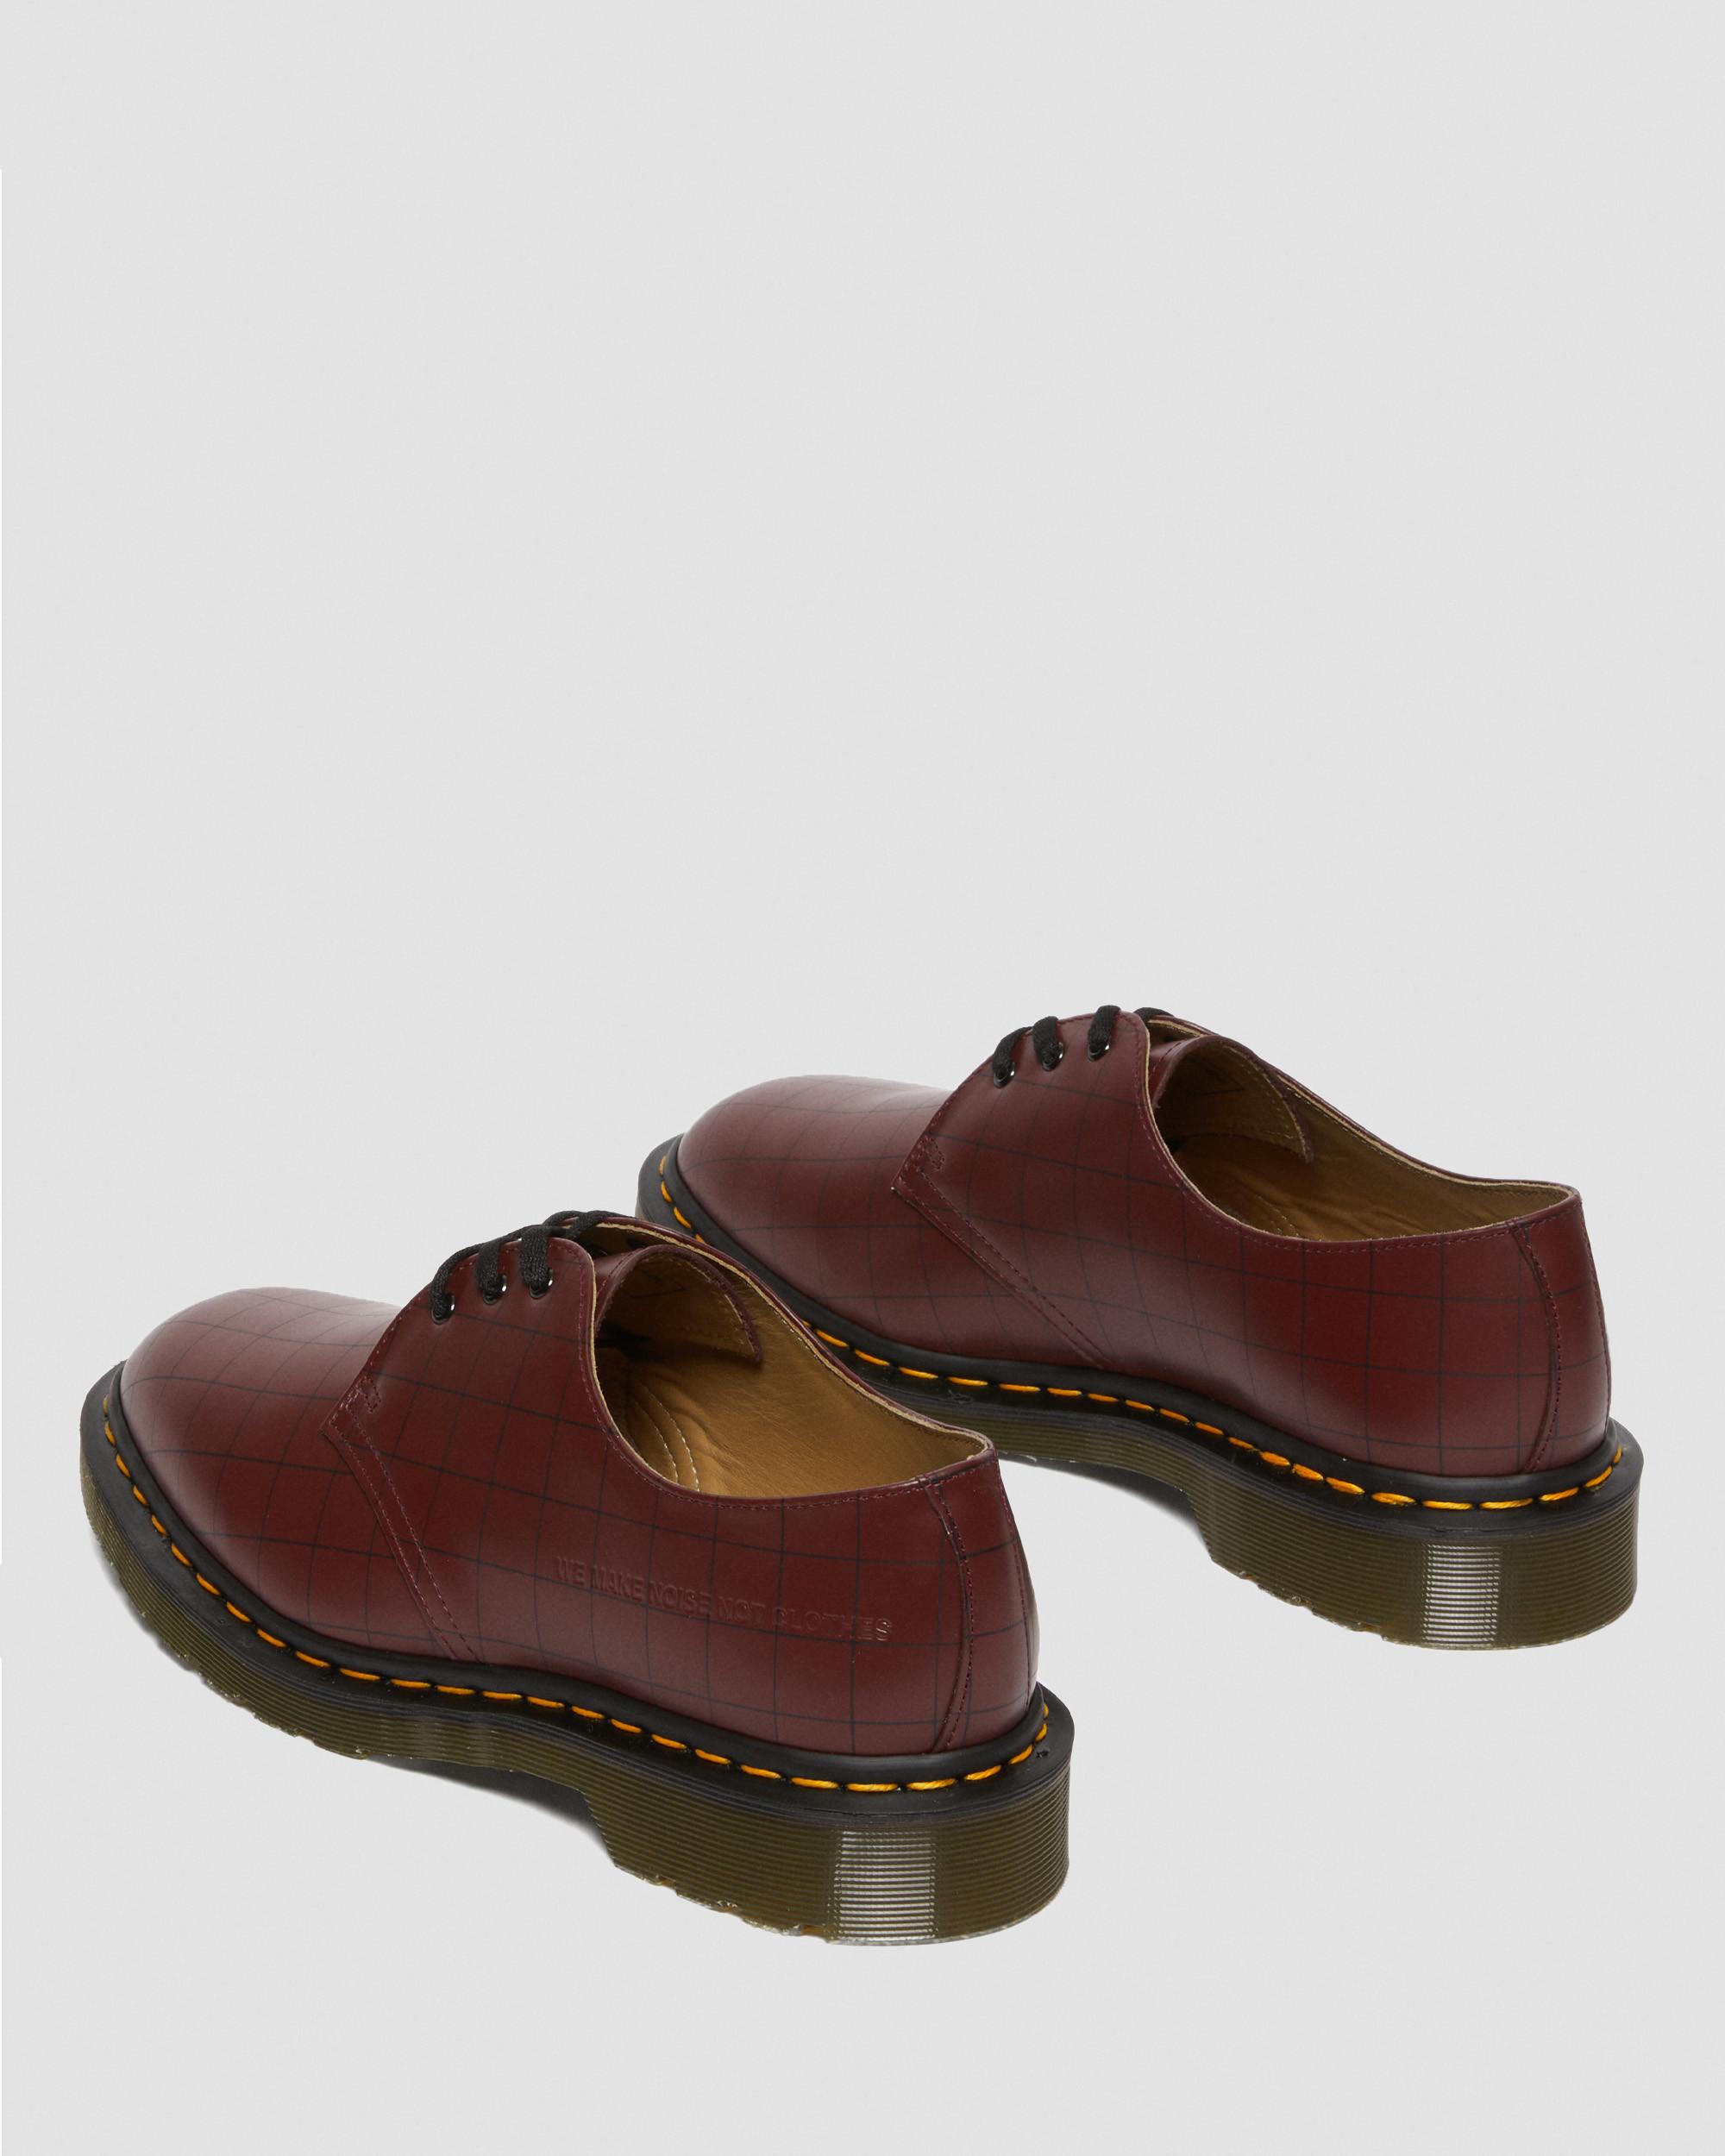 1461 Undercover Smooth Leather Shoes in Cherry Red